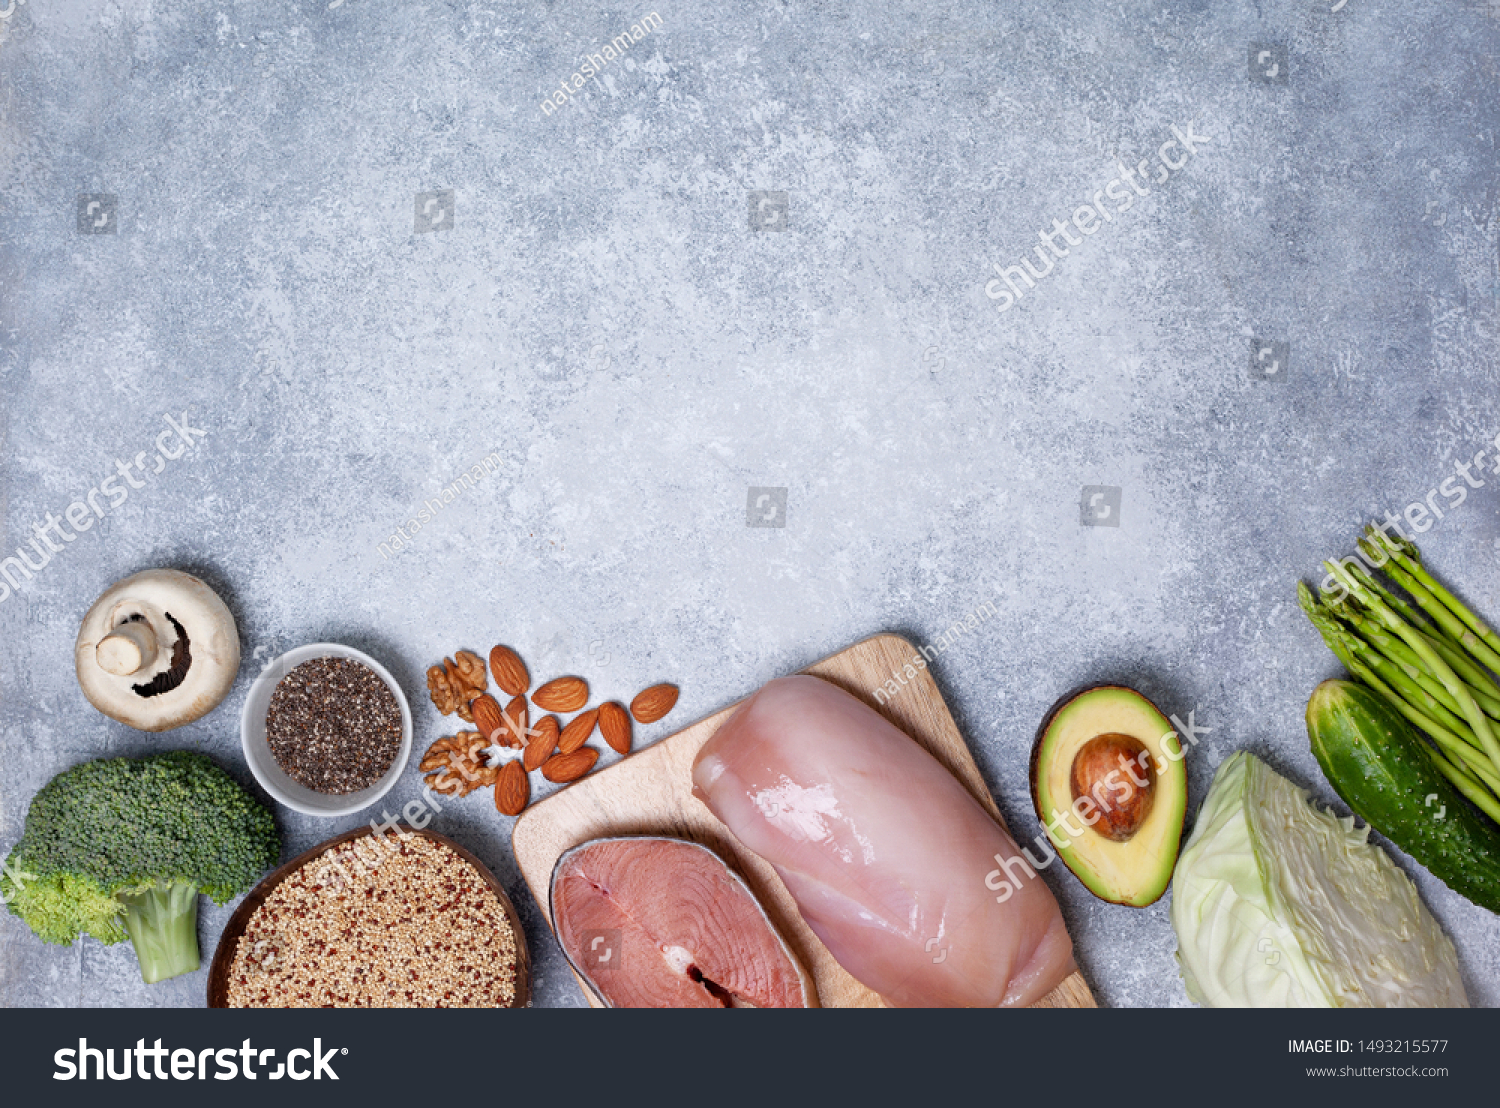 trendy pegan diet. pegan diet products : meat, fish, cereals, vegetables, nuts and berries. view from above #1493215577